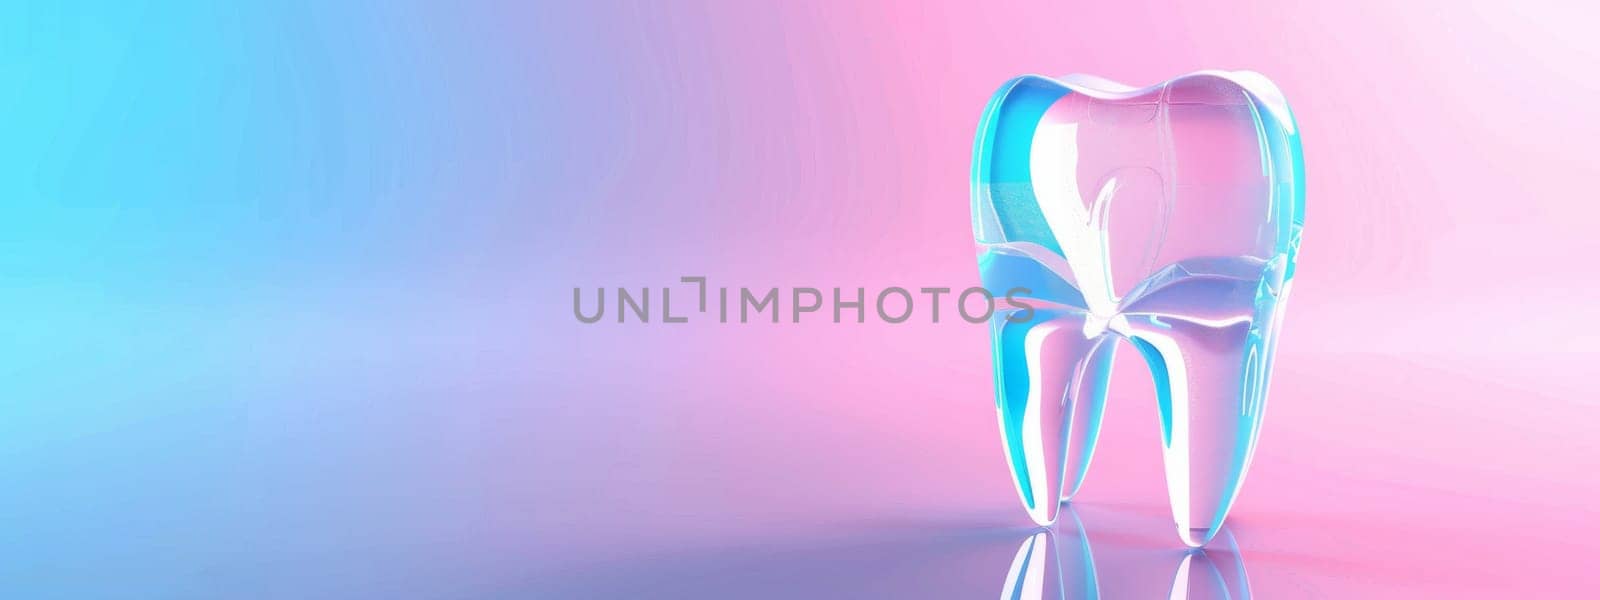 Model of tooth isolated on blue and pink background with copy space, healthcare concept by Kadula